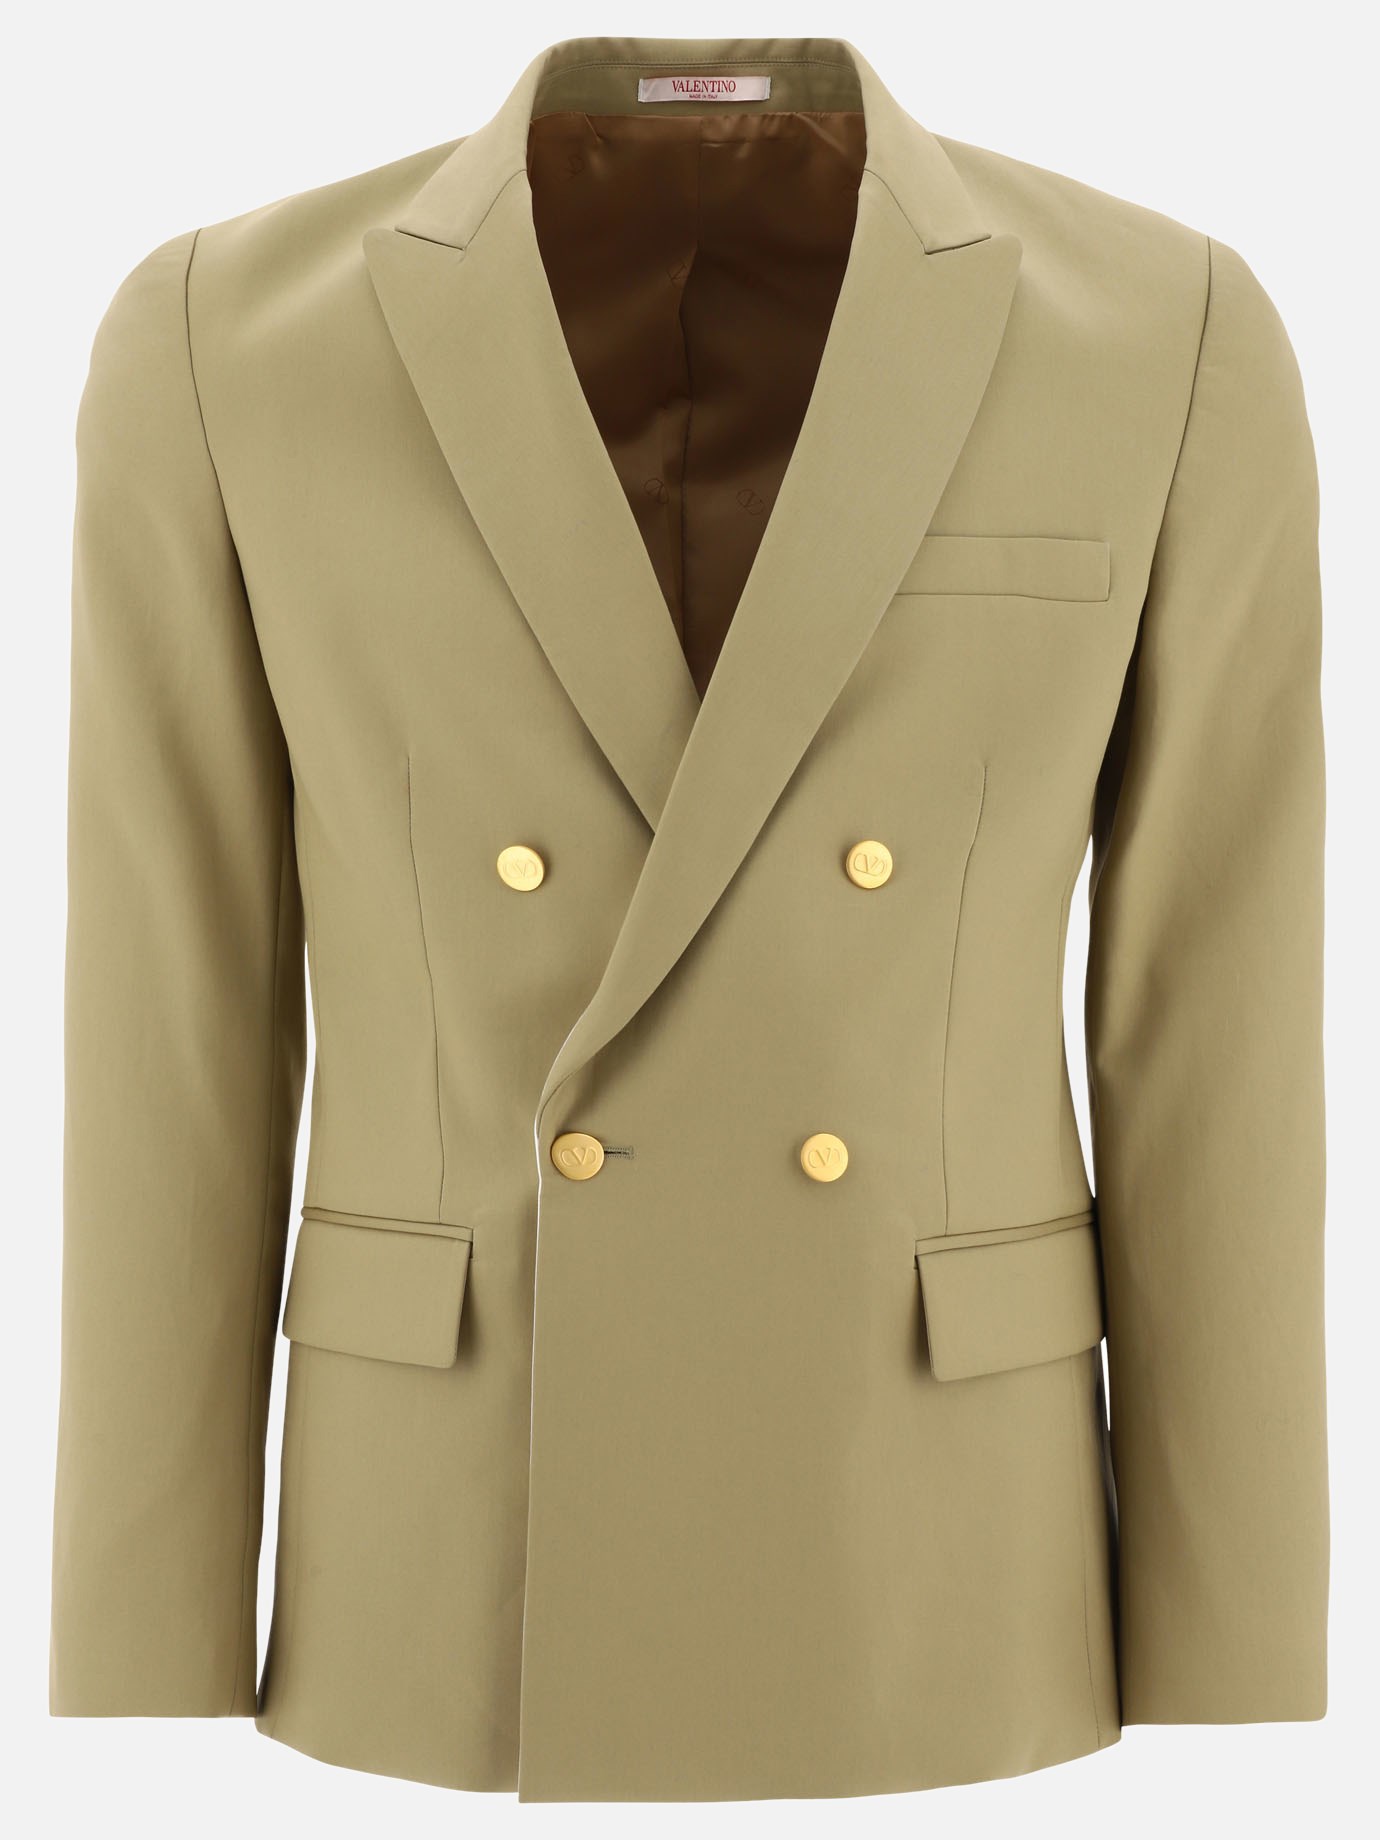 Double-breasted blazer with peak lapels